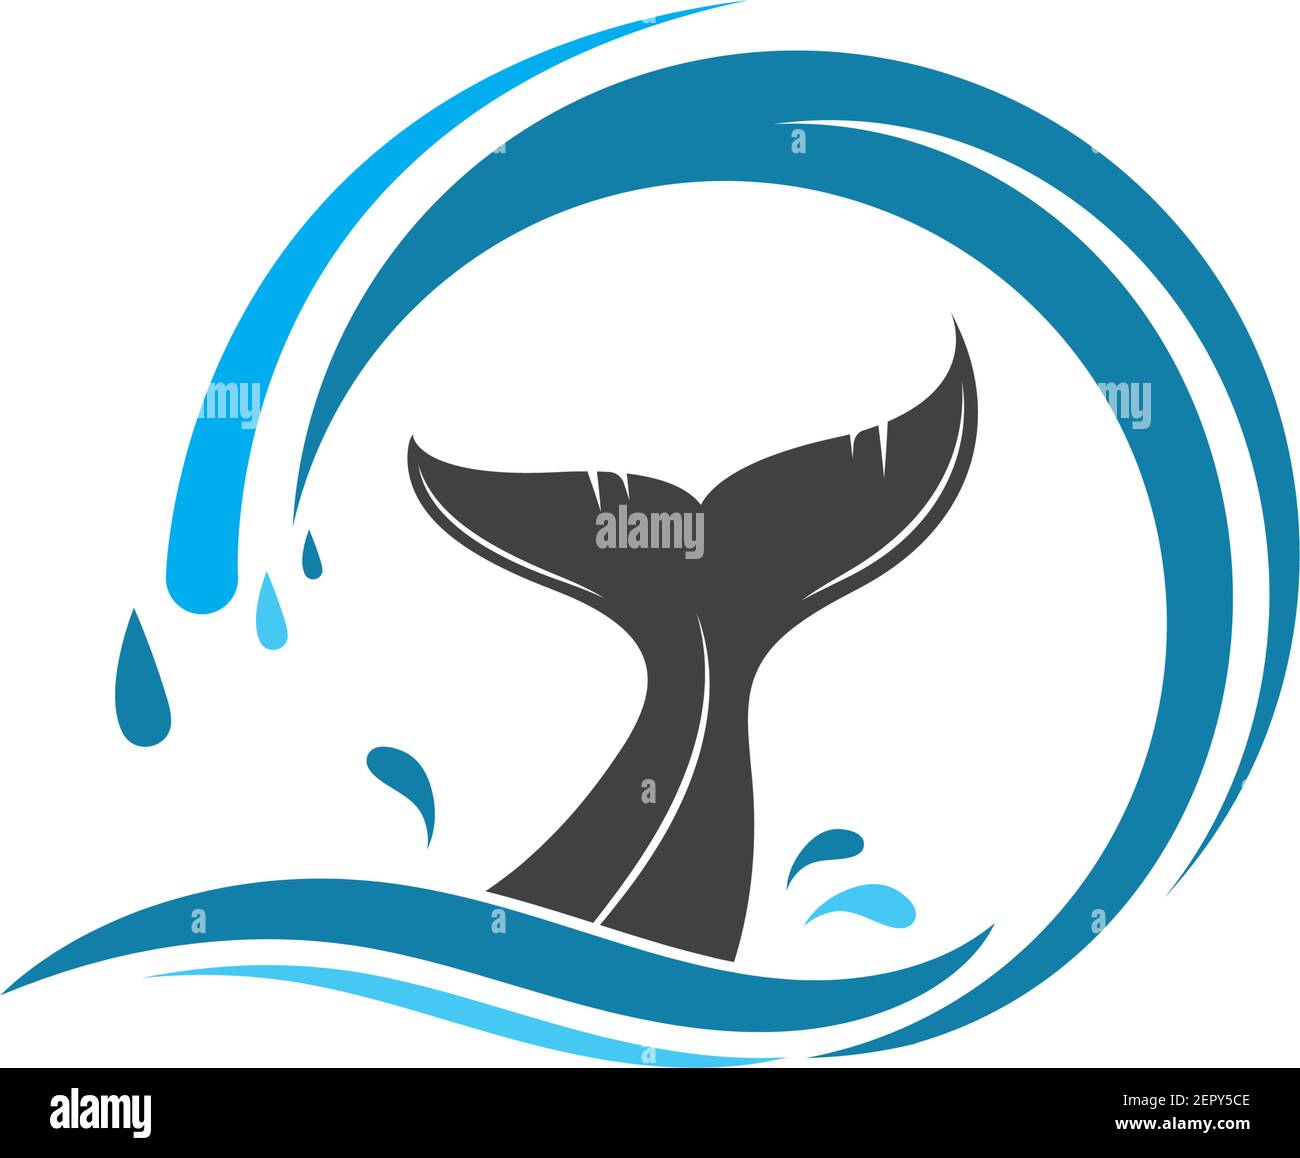 whale tail icon vector illustration design template Stock Vector